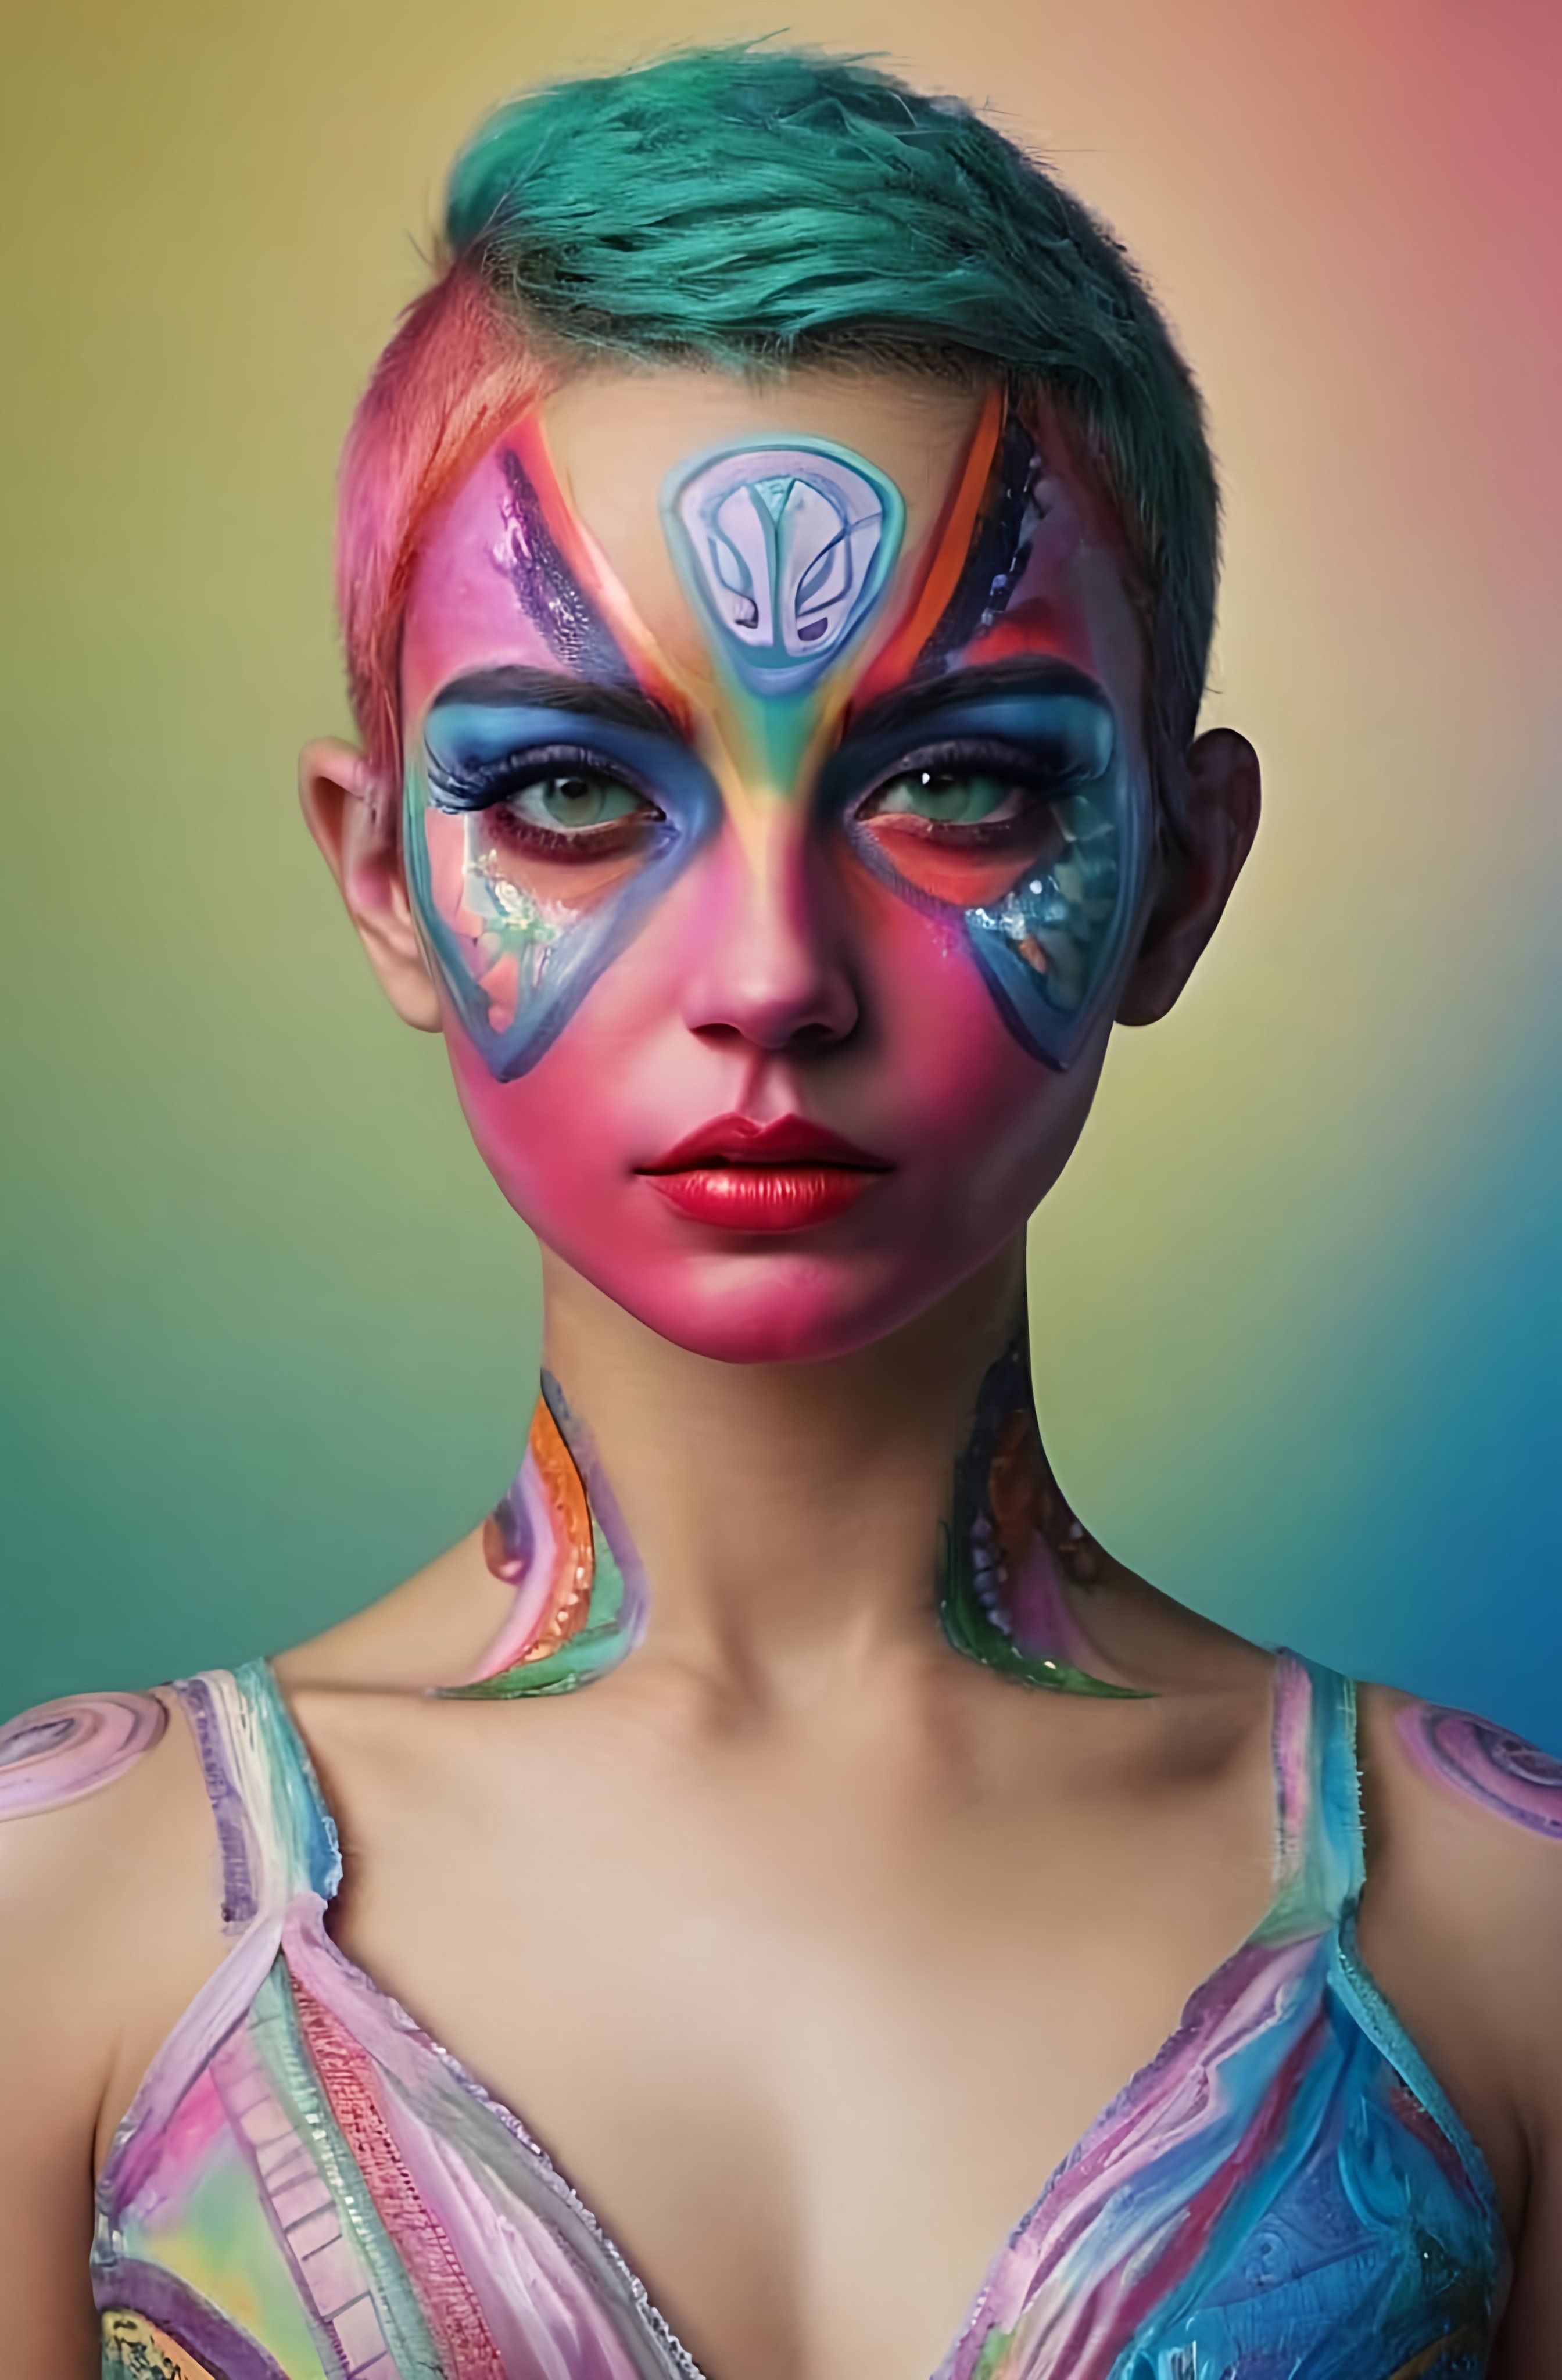 Prompt: a woman with colorful makeup and body art on her face and chest, with a blue and pink hair